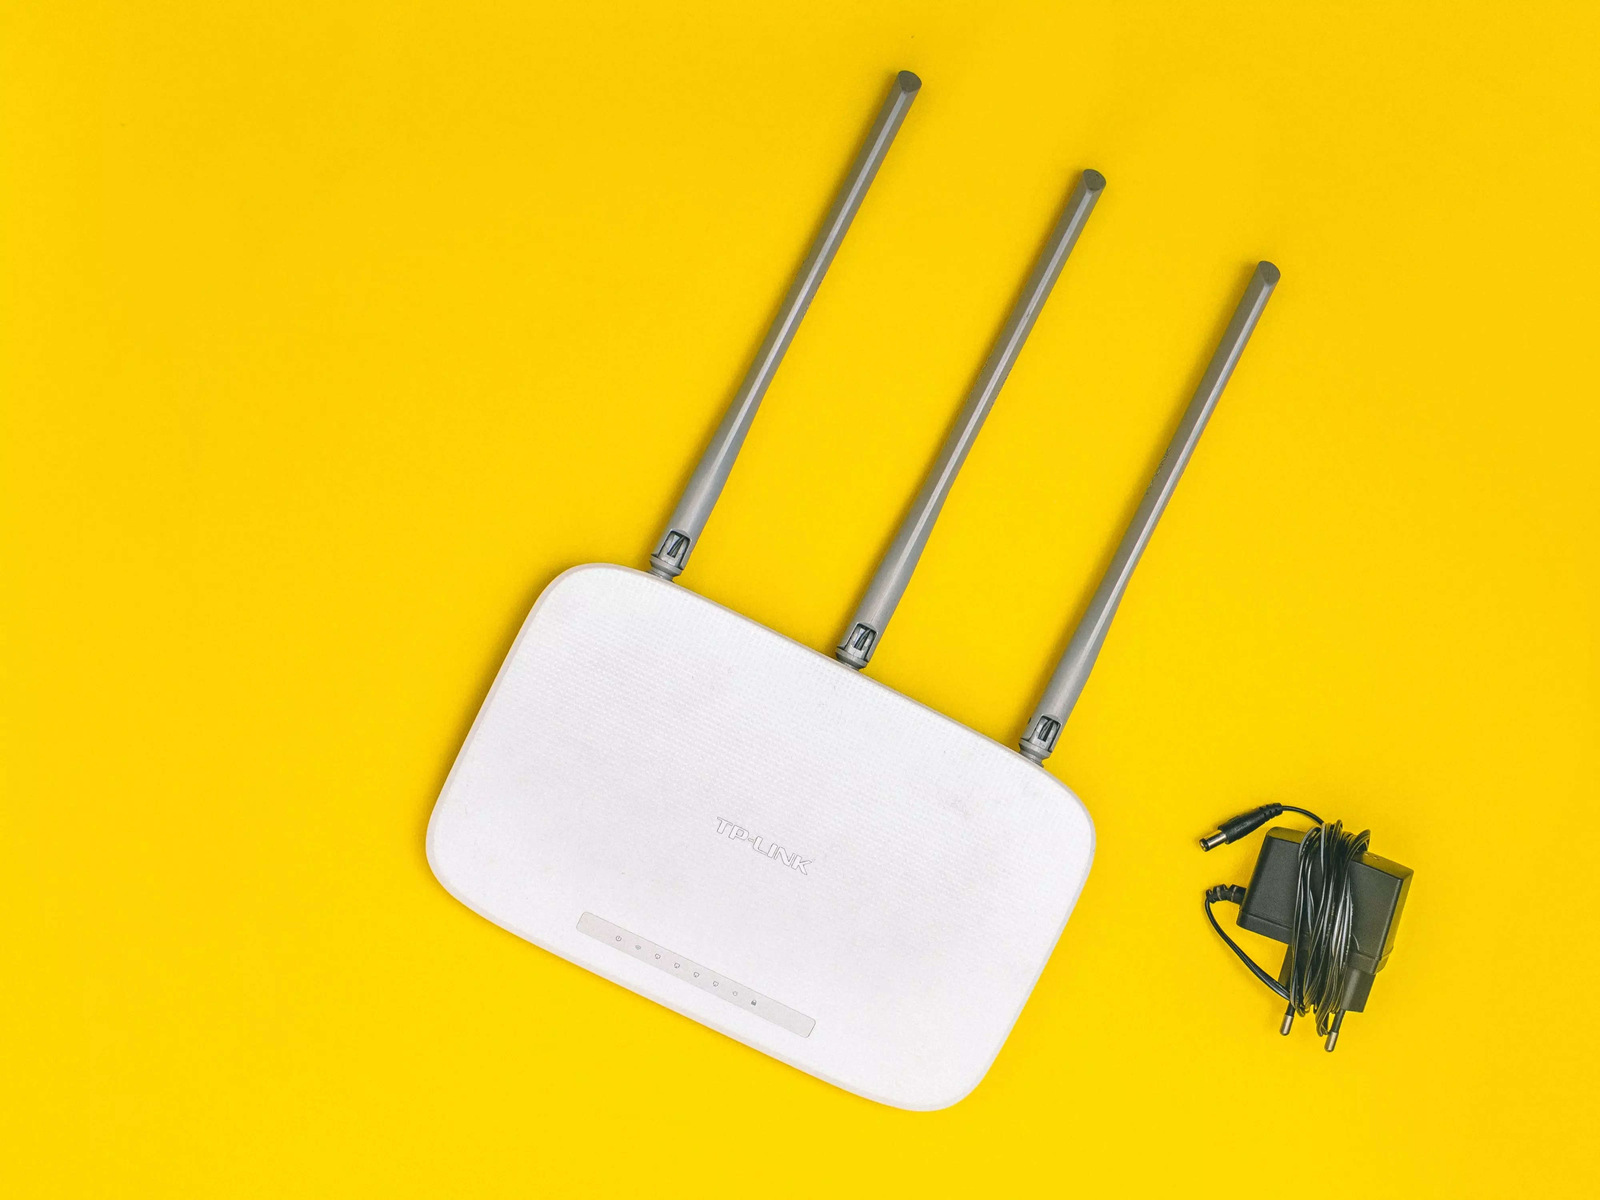 How To Add A Wireless Router To An Existing Network